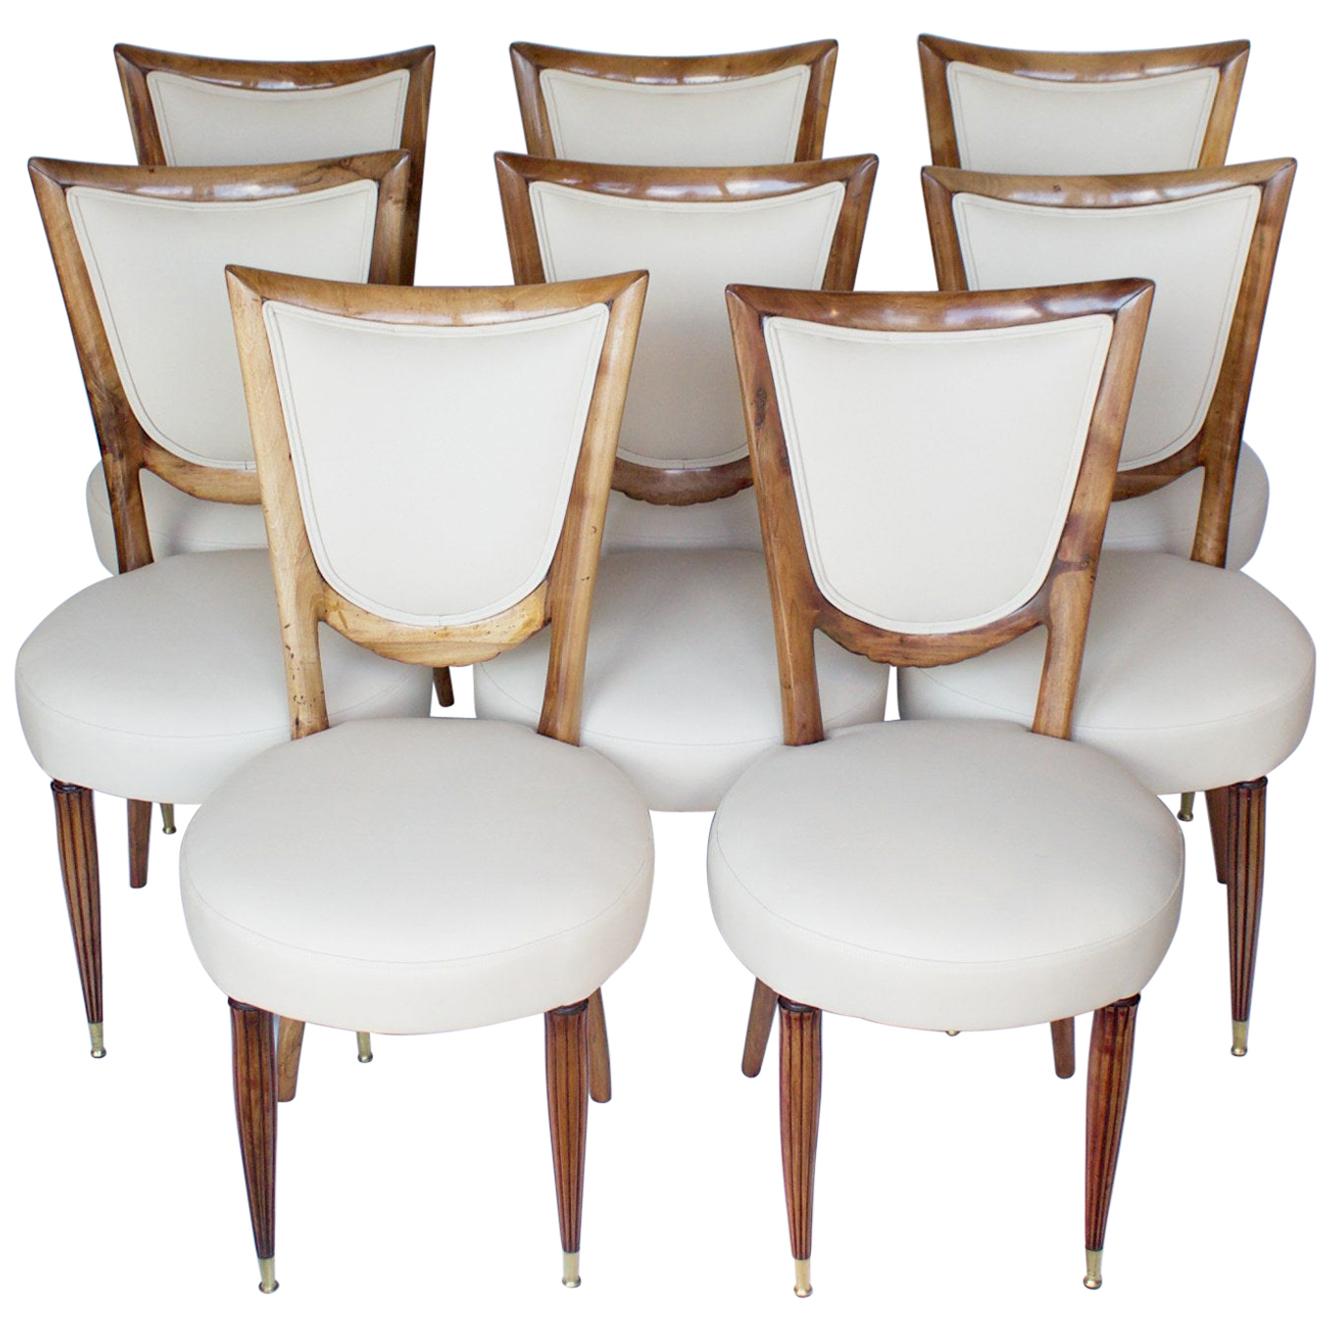 8 Solid Walnut Italian Art Deco Dining Chairs Upholstered in Cream Leather